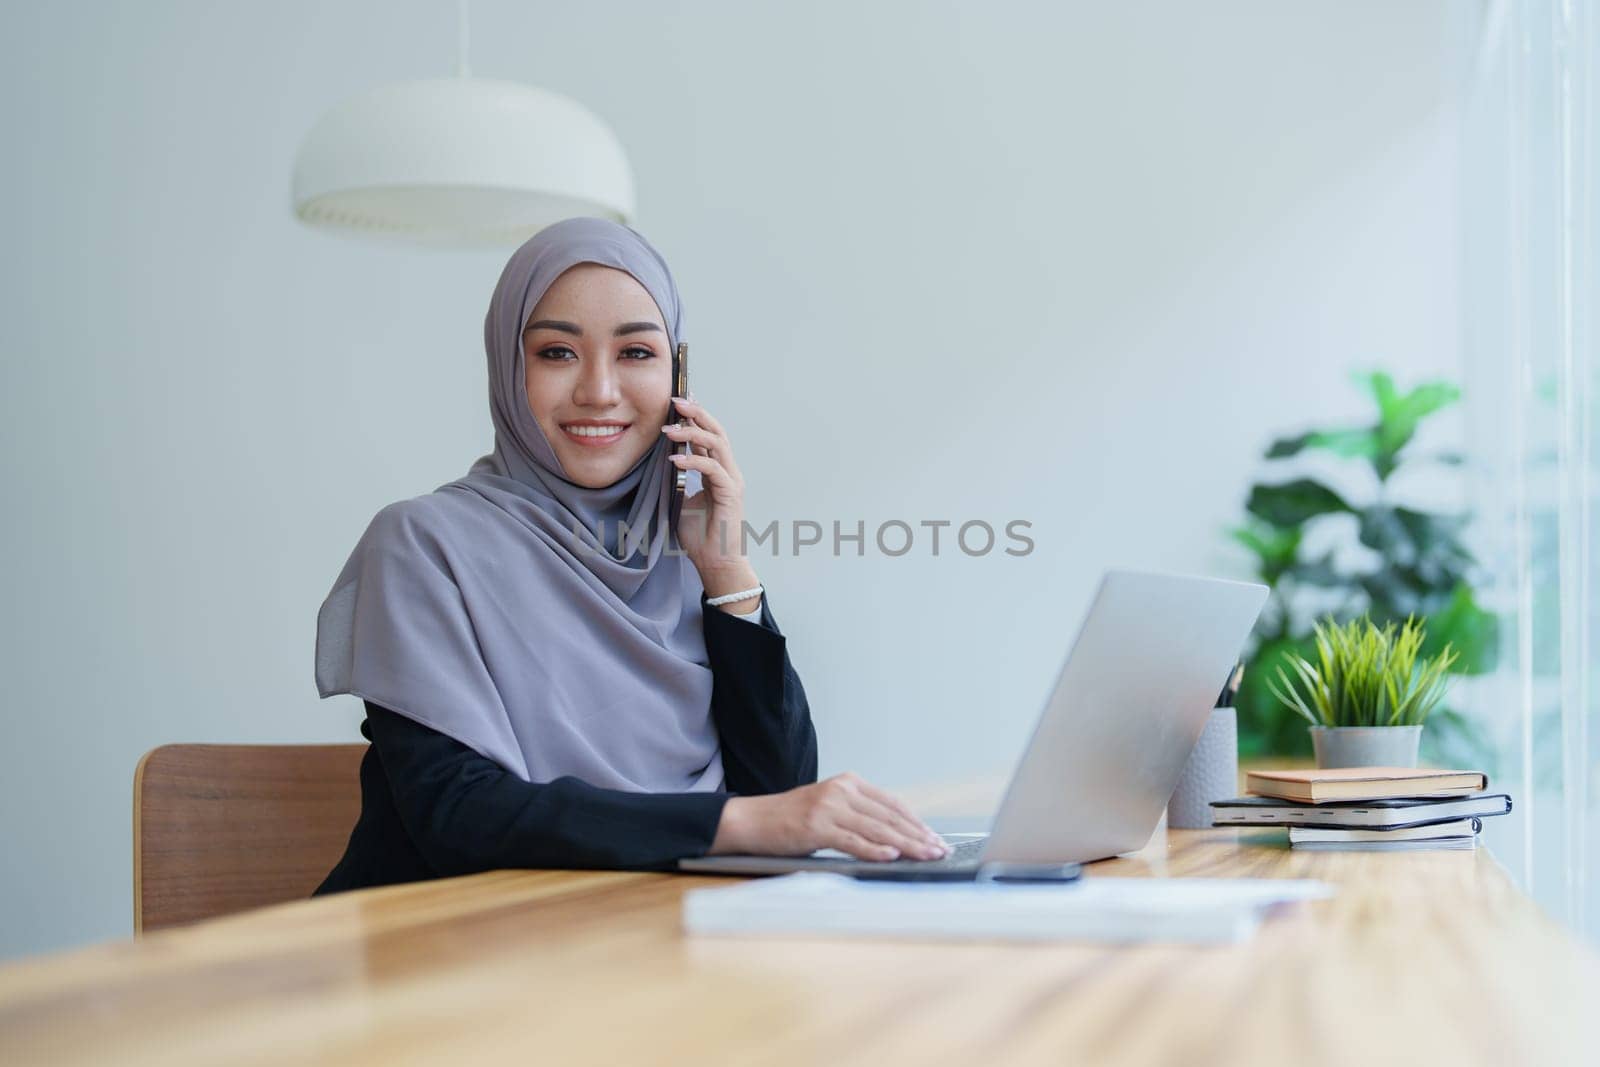 Beautiful Muslim woman talking on the phone and using a computer on her desk.